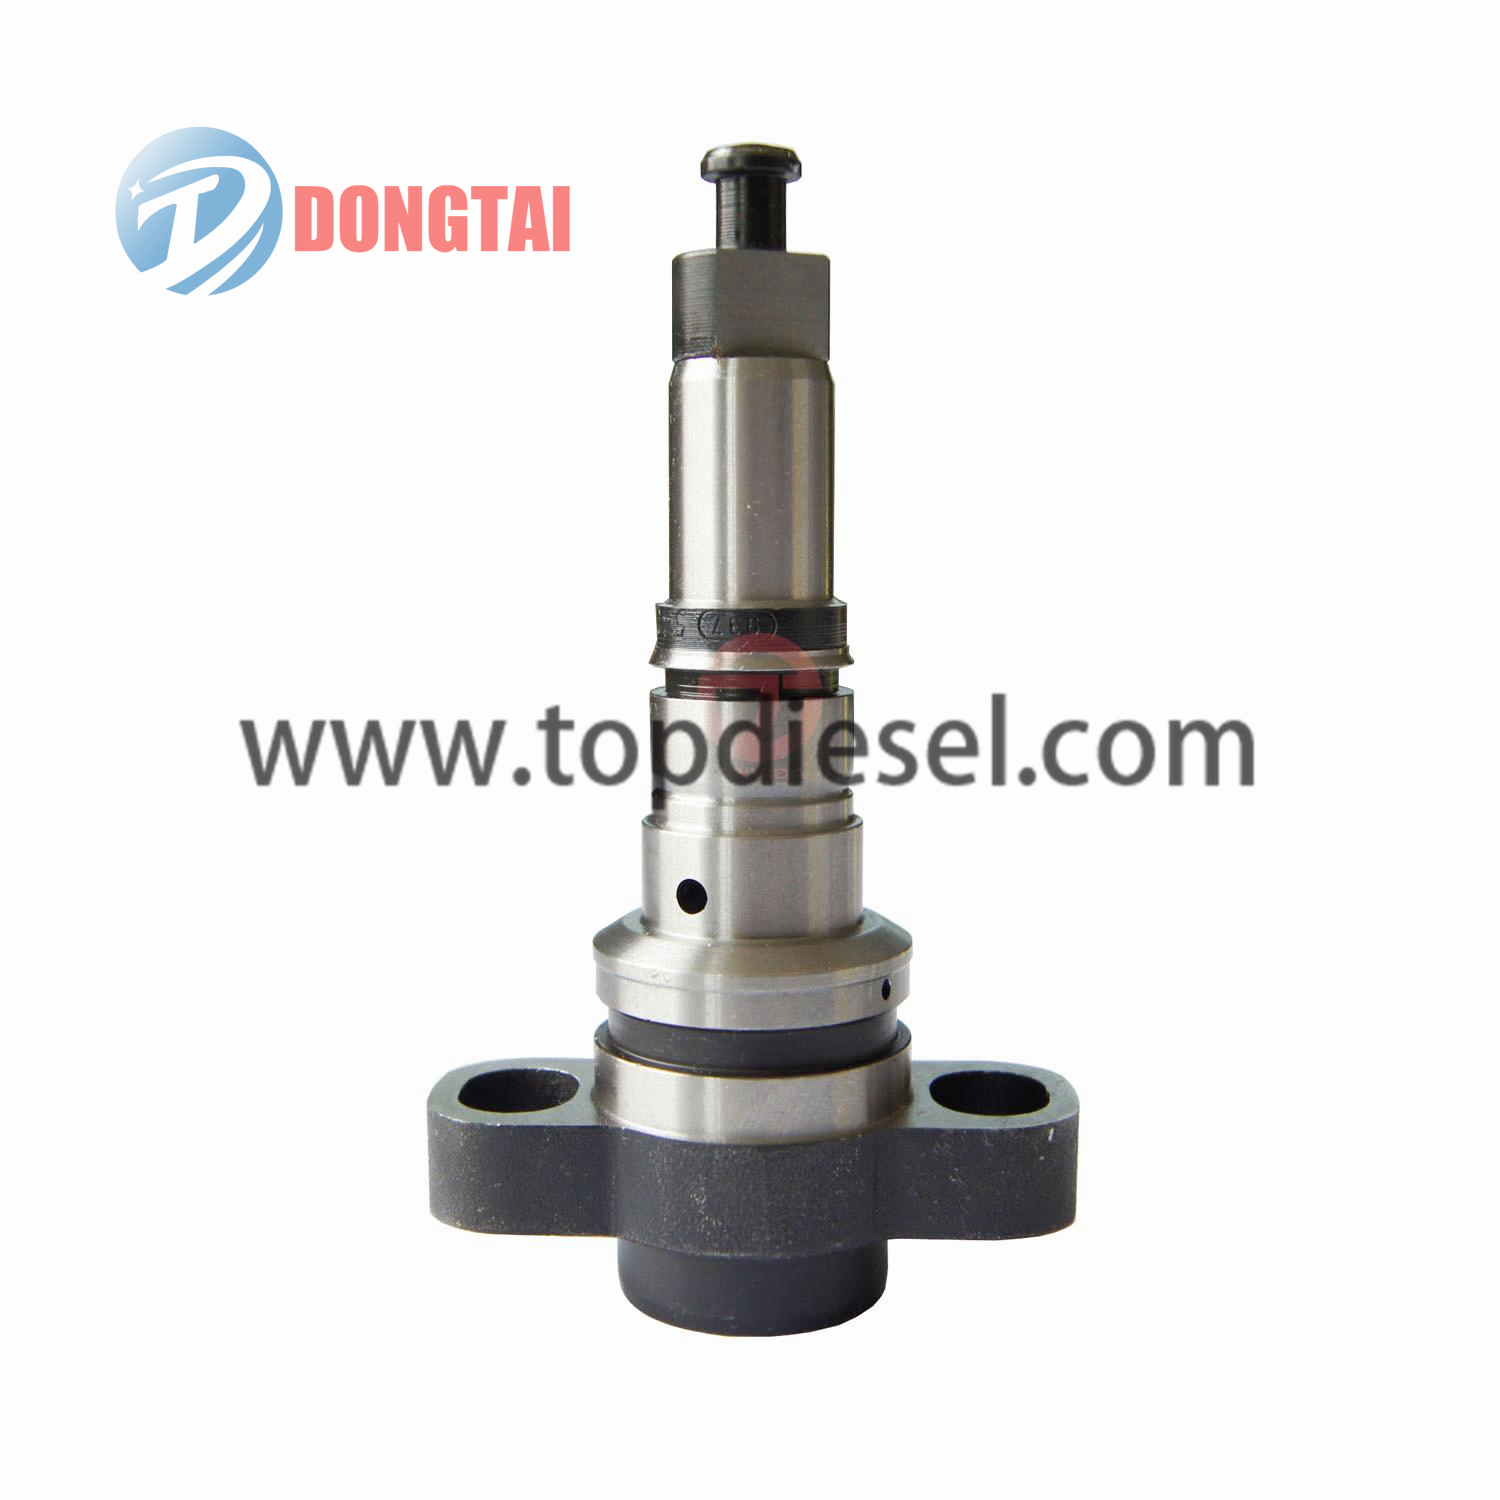 Popular Design for Injector Seat Cutter - Plunger(Element) P Type – Dongtai